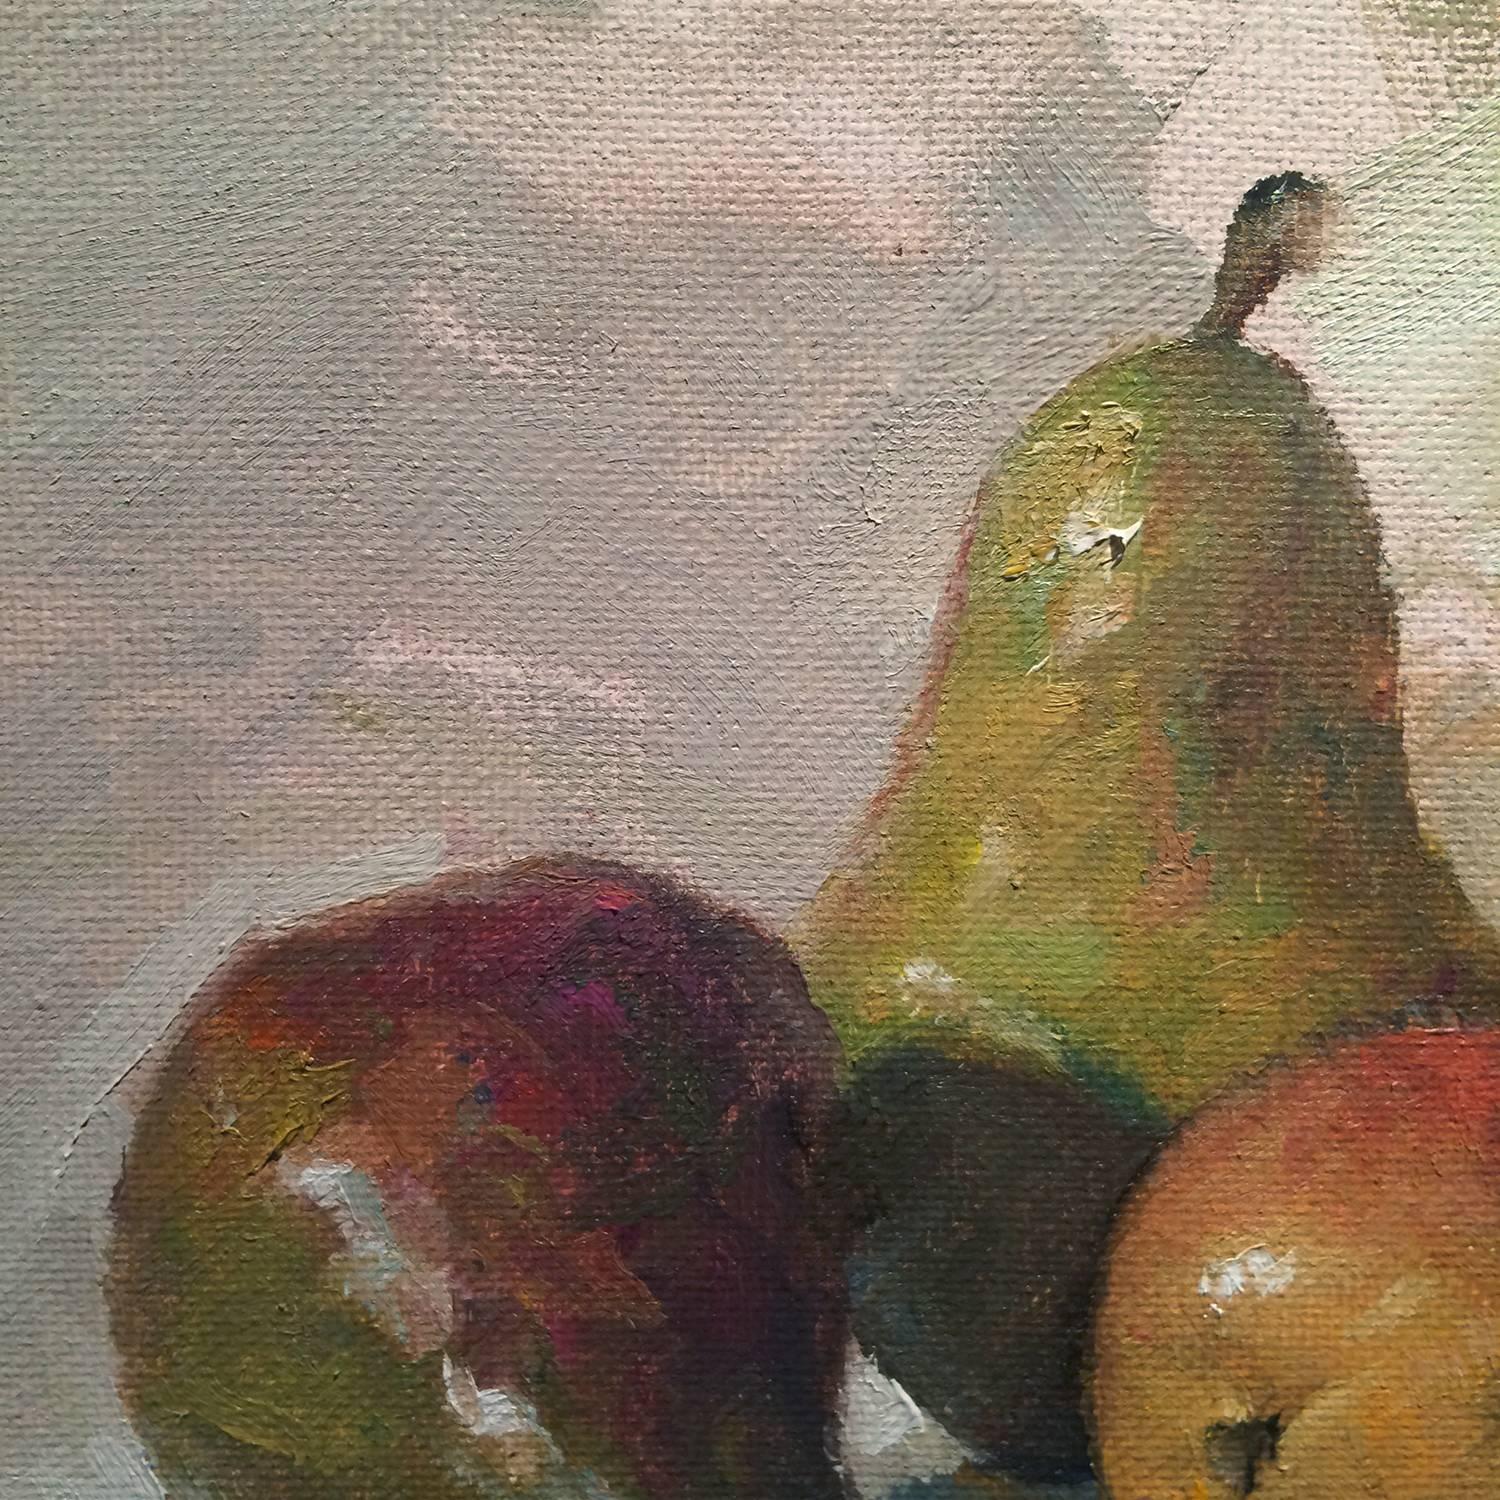 Group of Pears 2